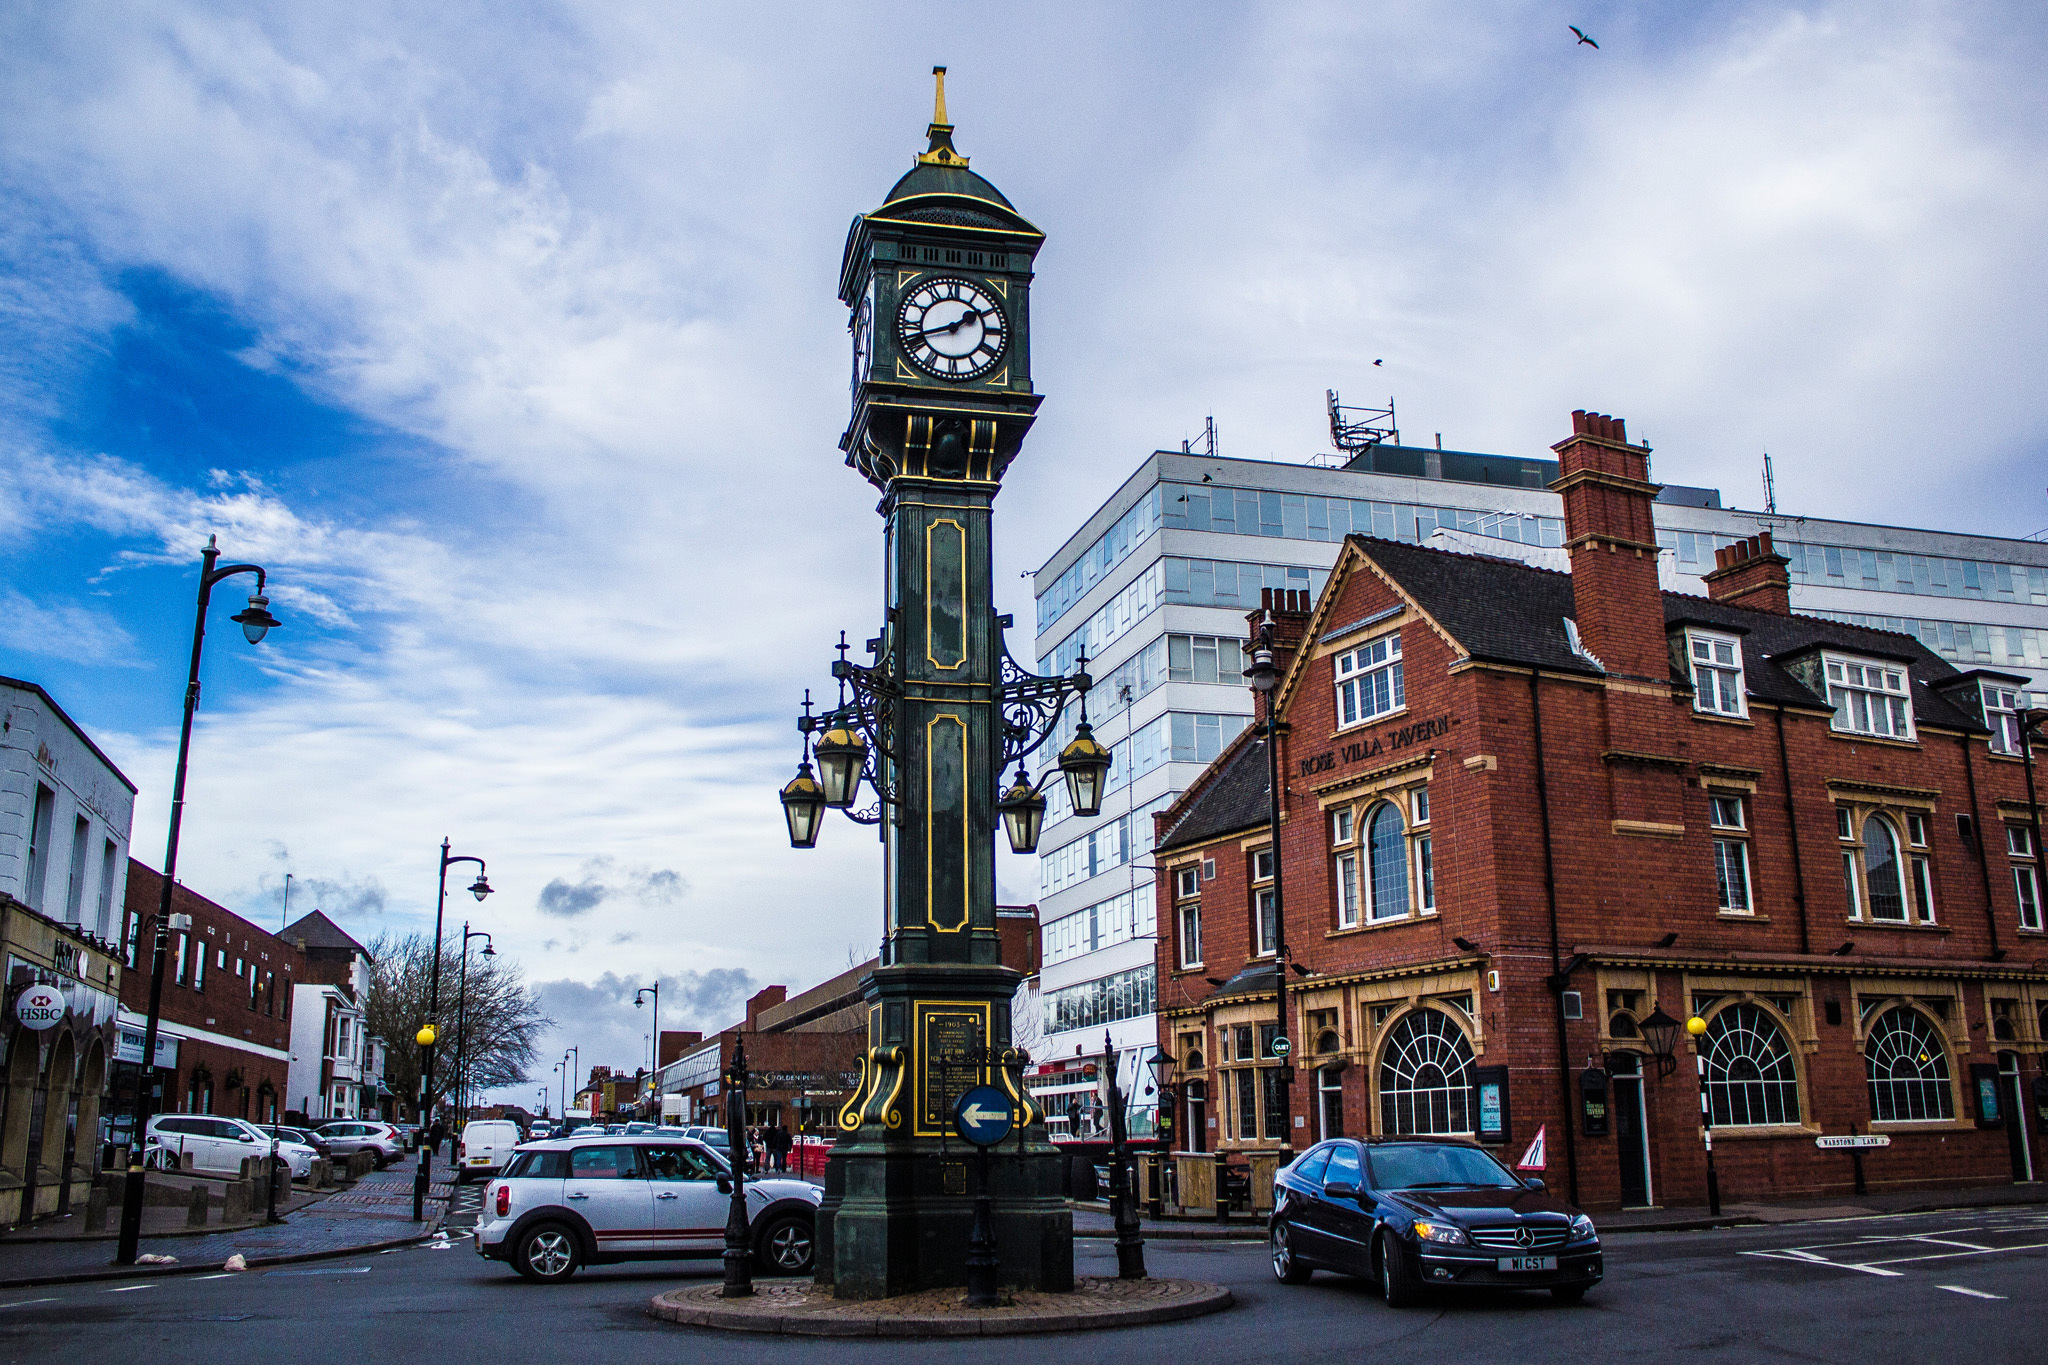 Birmingham attractions: top sights and attractionsin Birmingham – Time